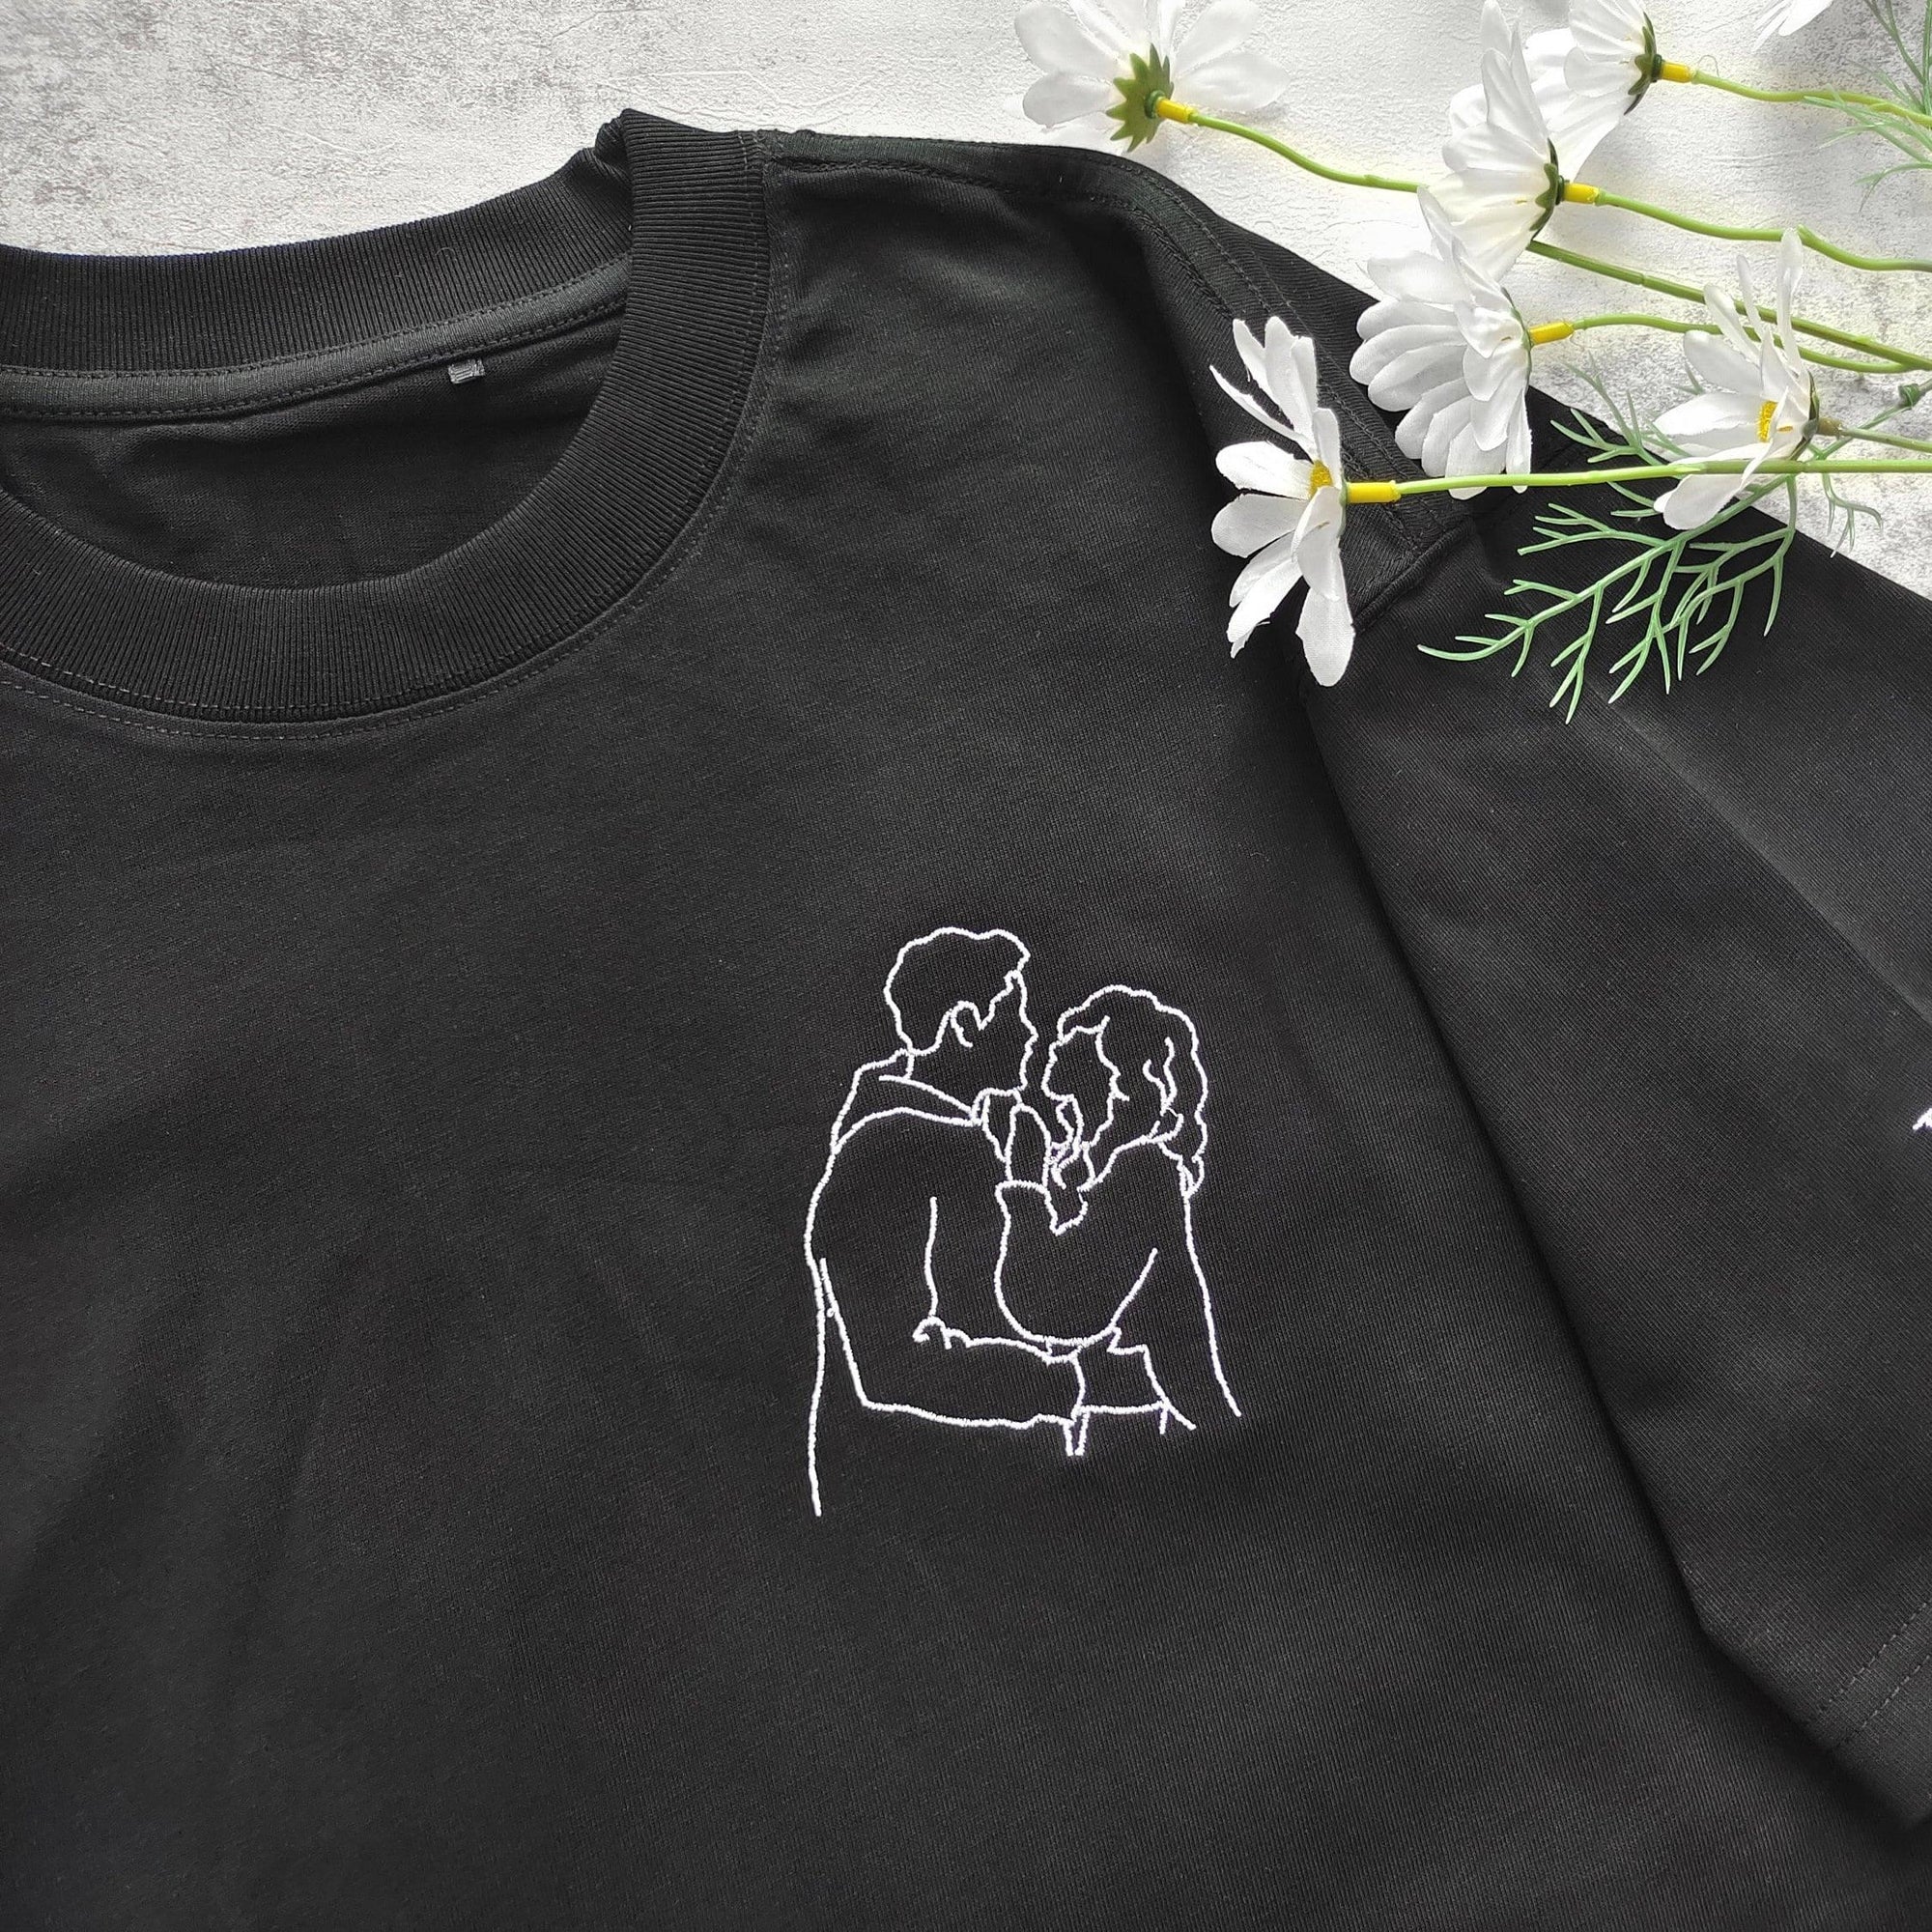 Custom Embroidered Portrait Outline Photo Matching Couples Sweatshirt